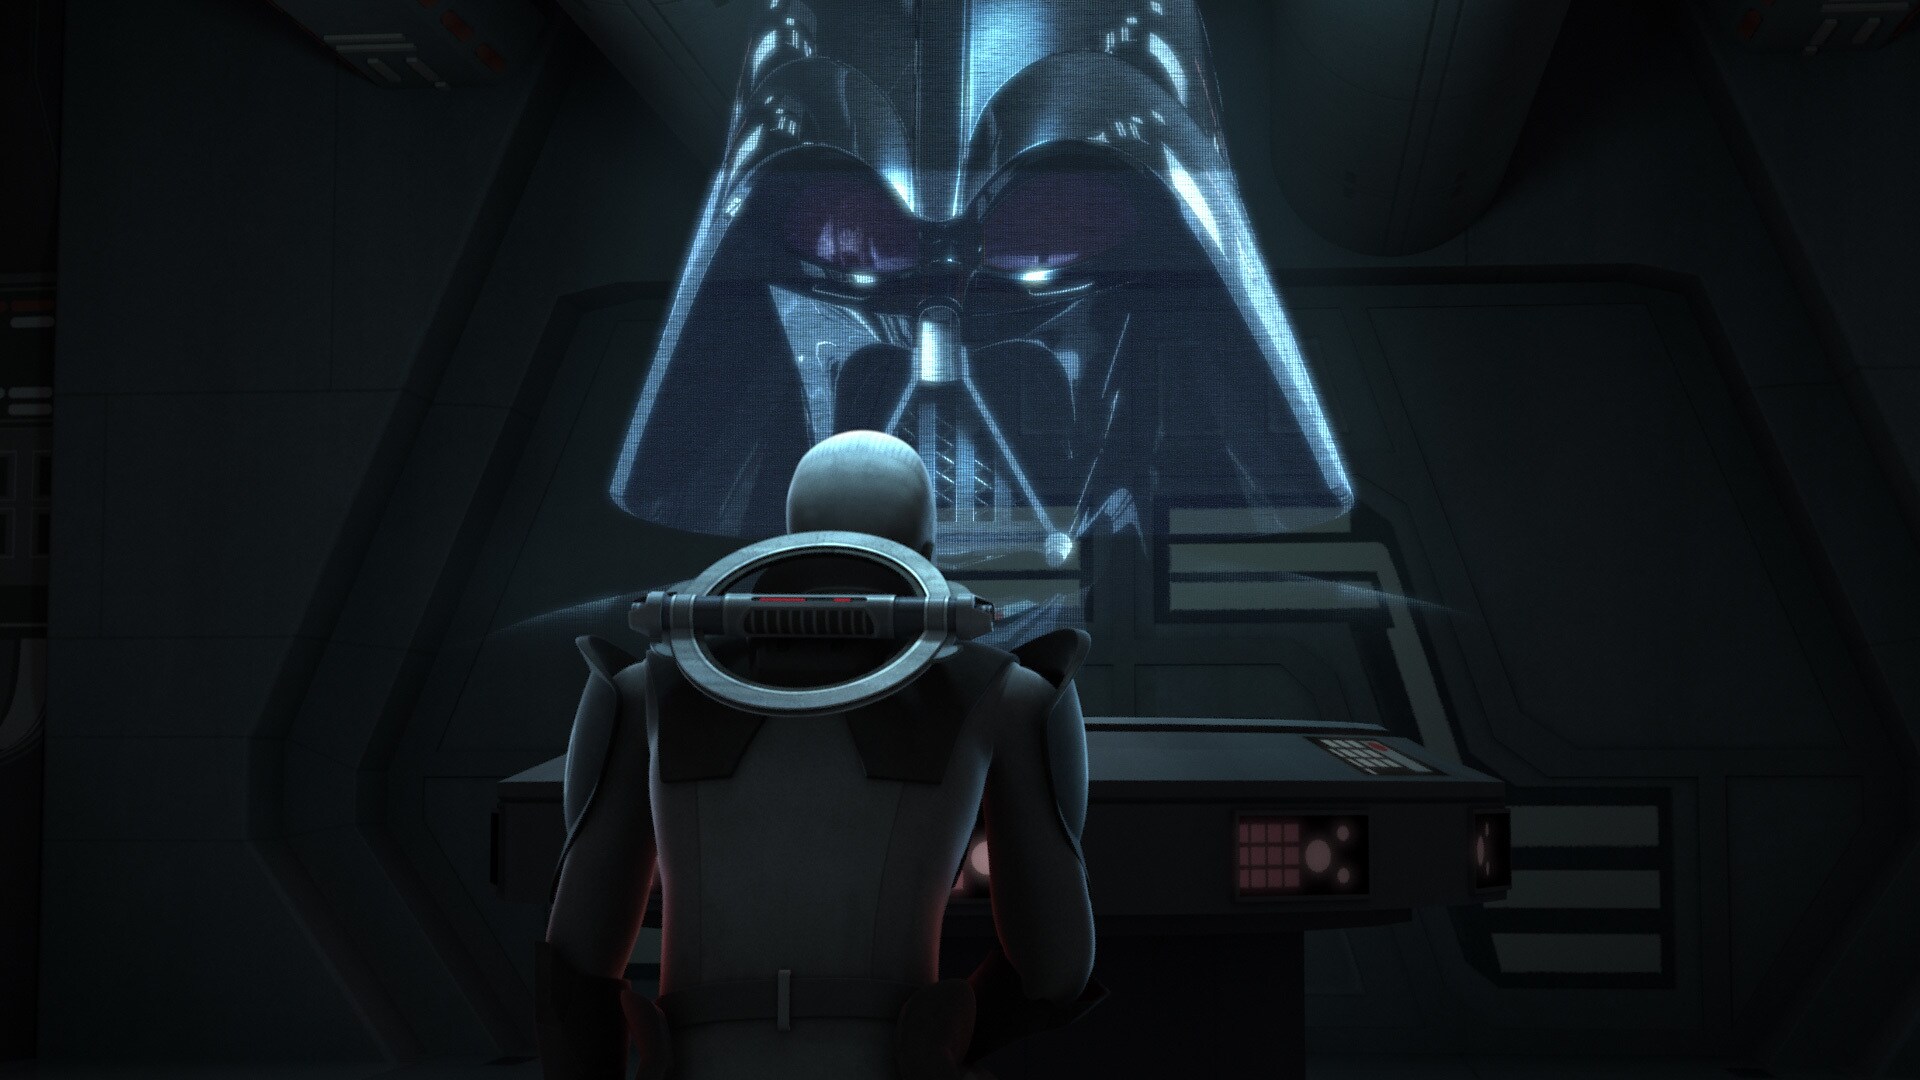 The Inquisitor contacts the dreaded Sith Lord, Darth Vader. "The Jedi Knights are all but destroy...